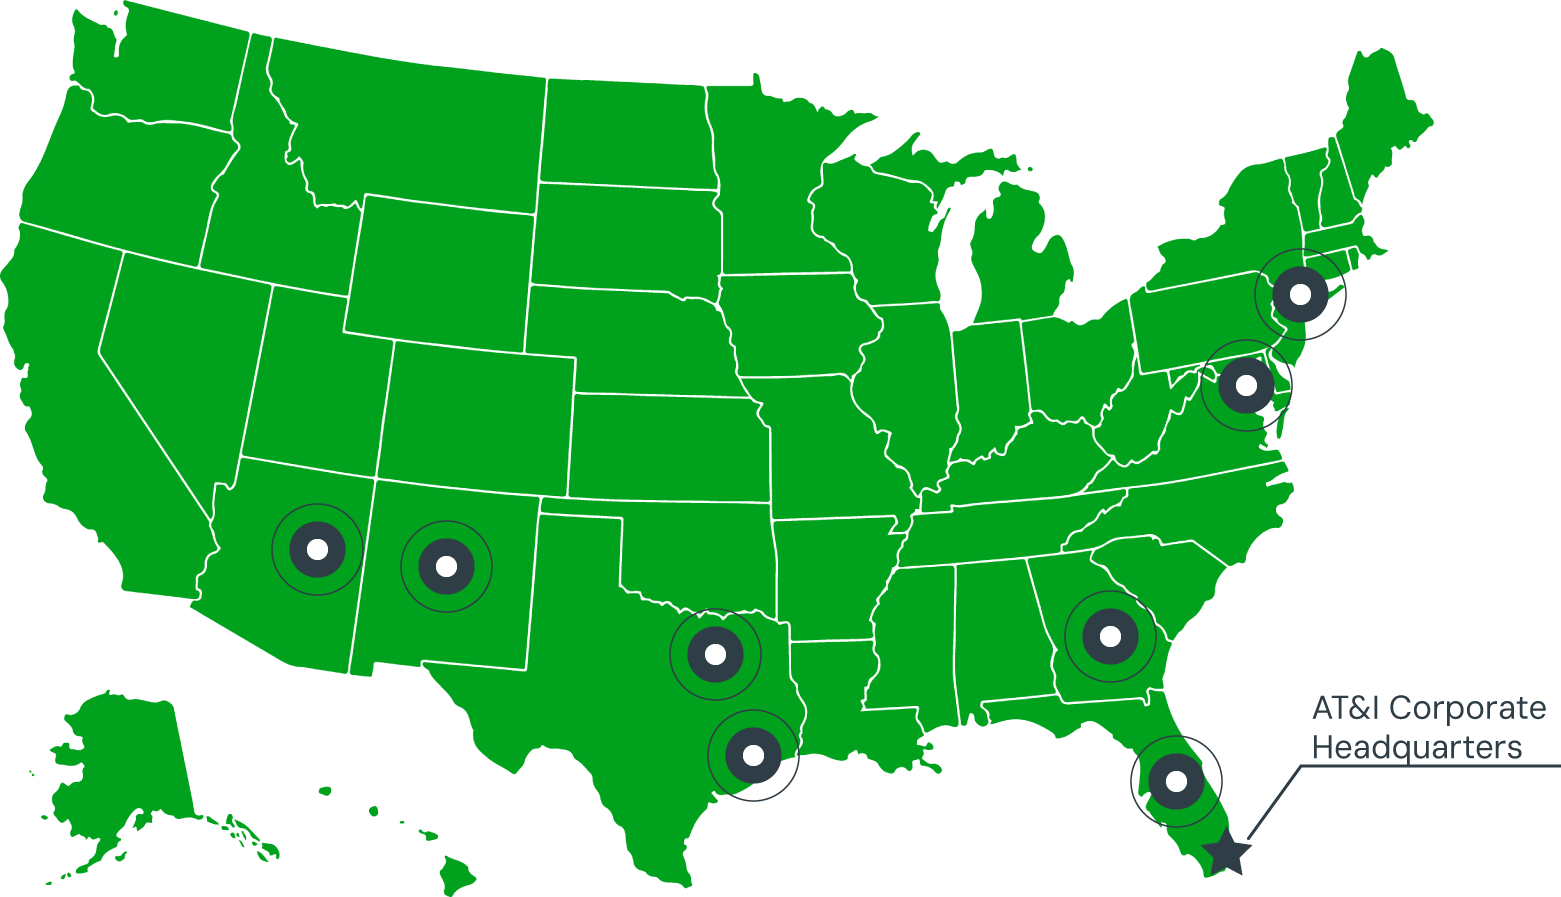 US map pinned with AT&I service area locations.